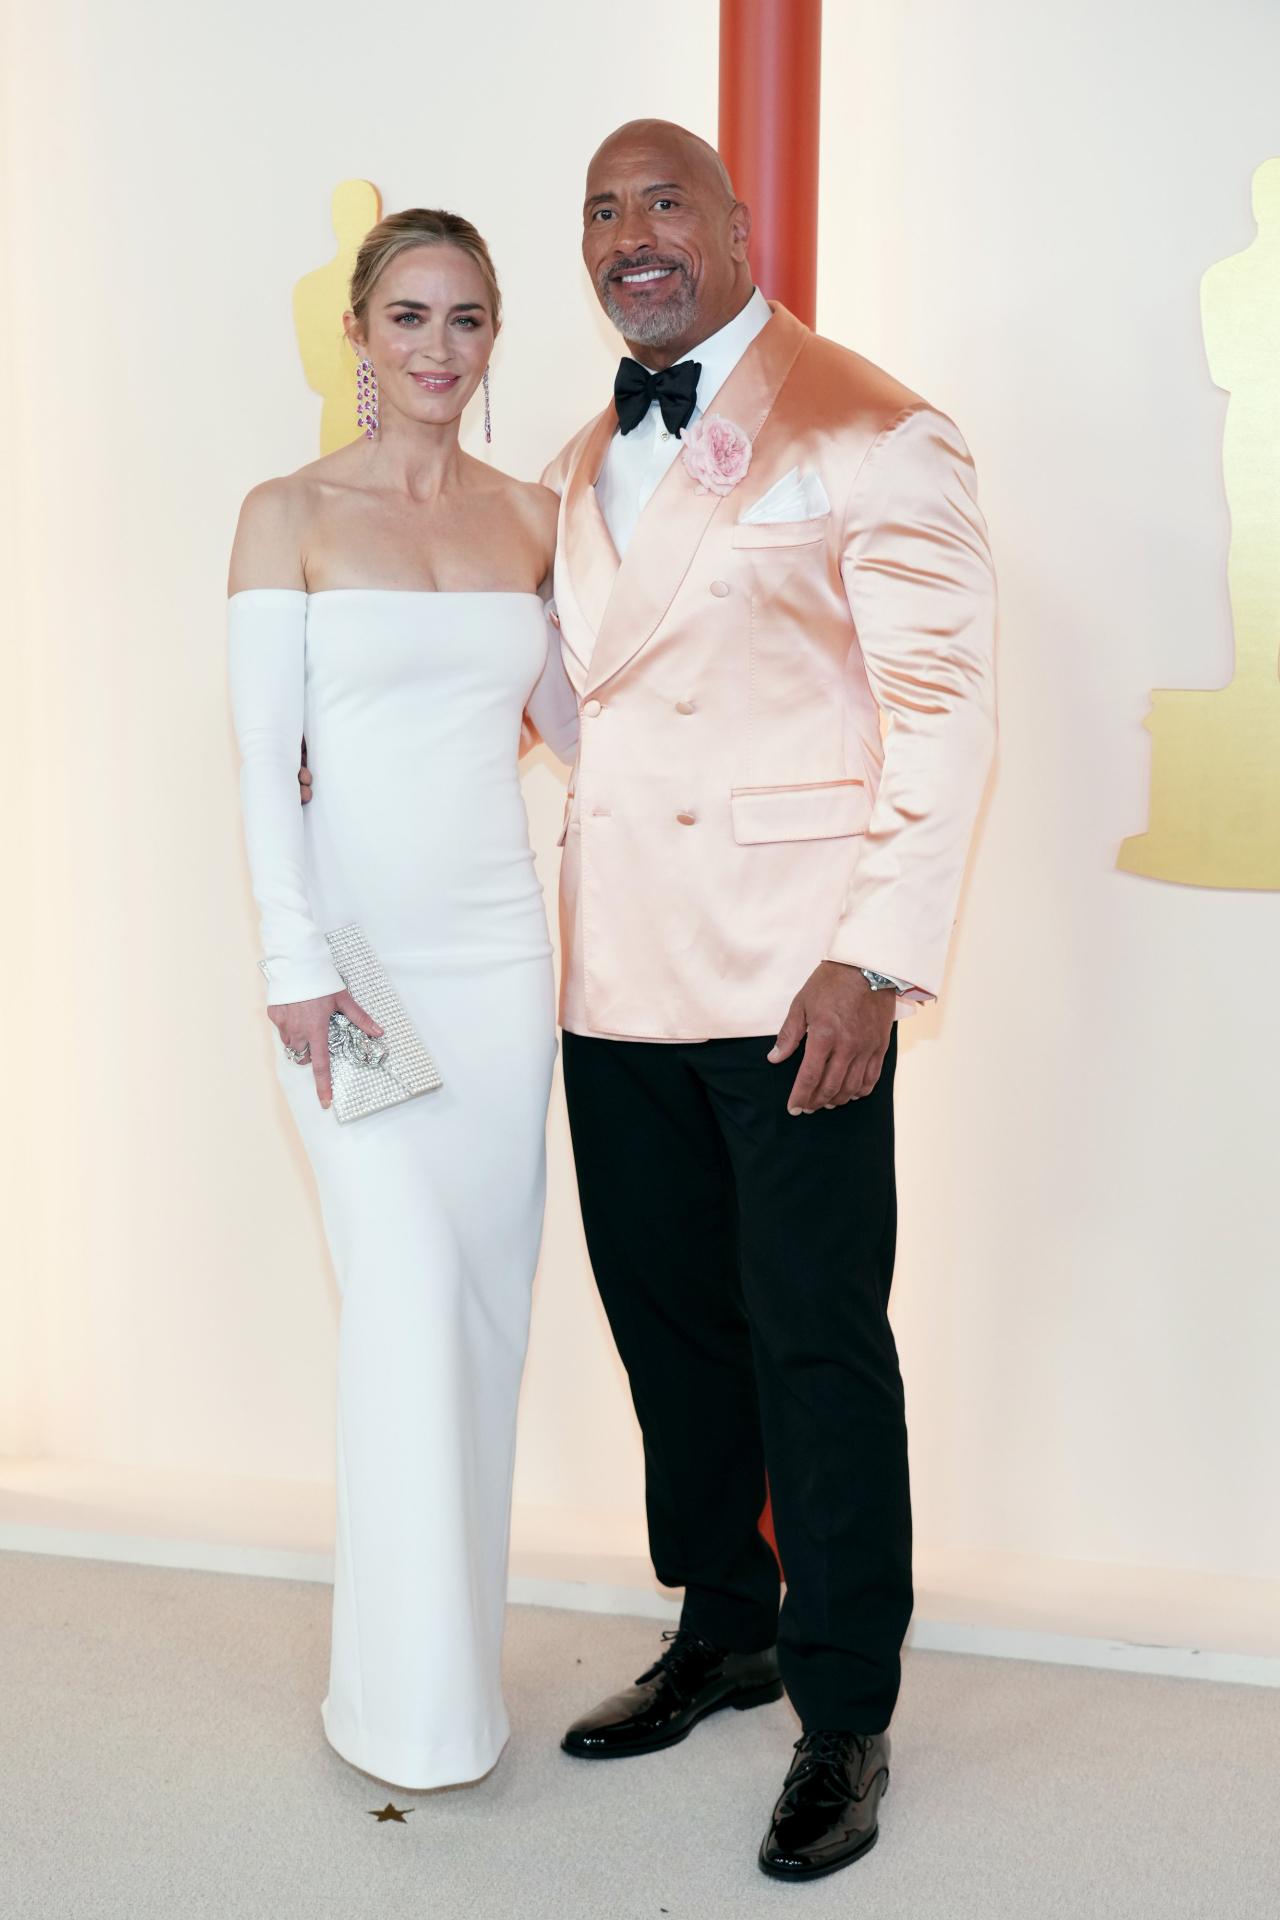 Hollywood star Dwayne Johnson wore a coral jacket at the 95th Annual Academy Awards.He posed with co-presenter Emily Blunt at the red carpet. The actress looked stunning in a white gown